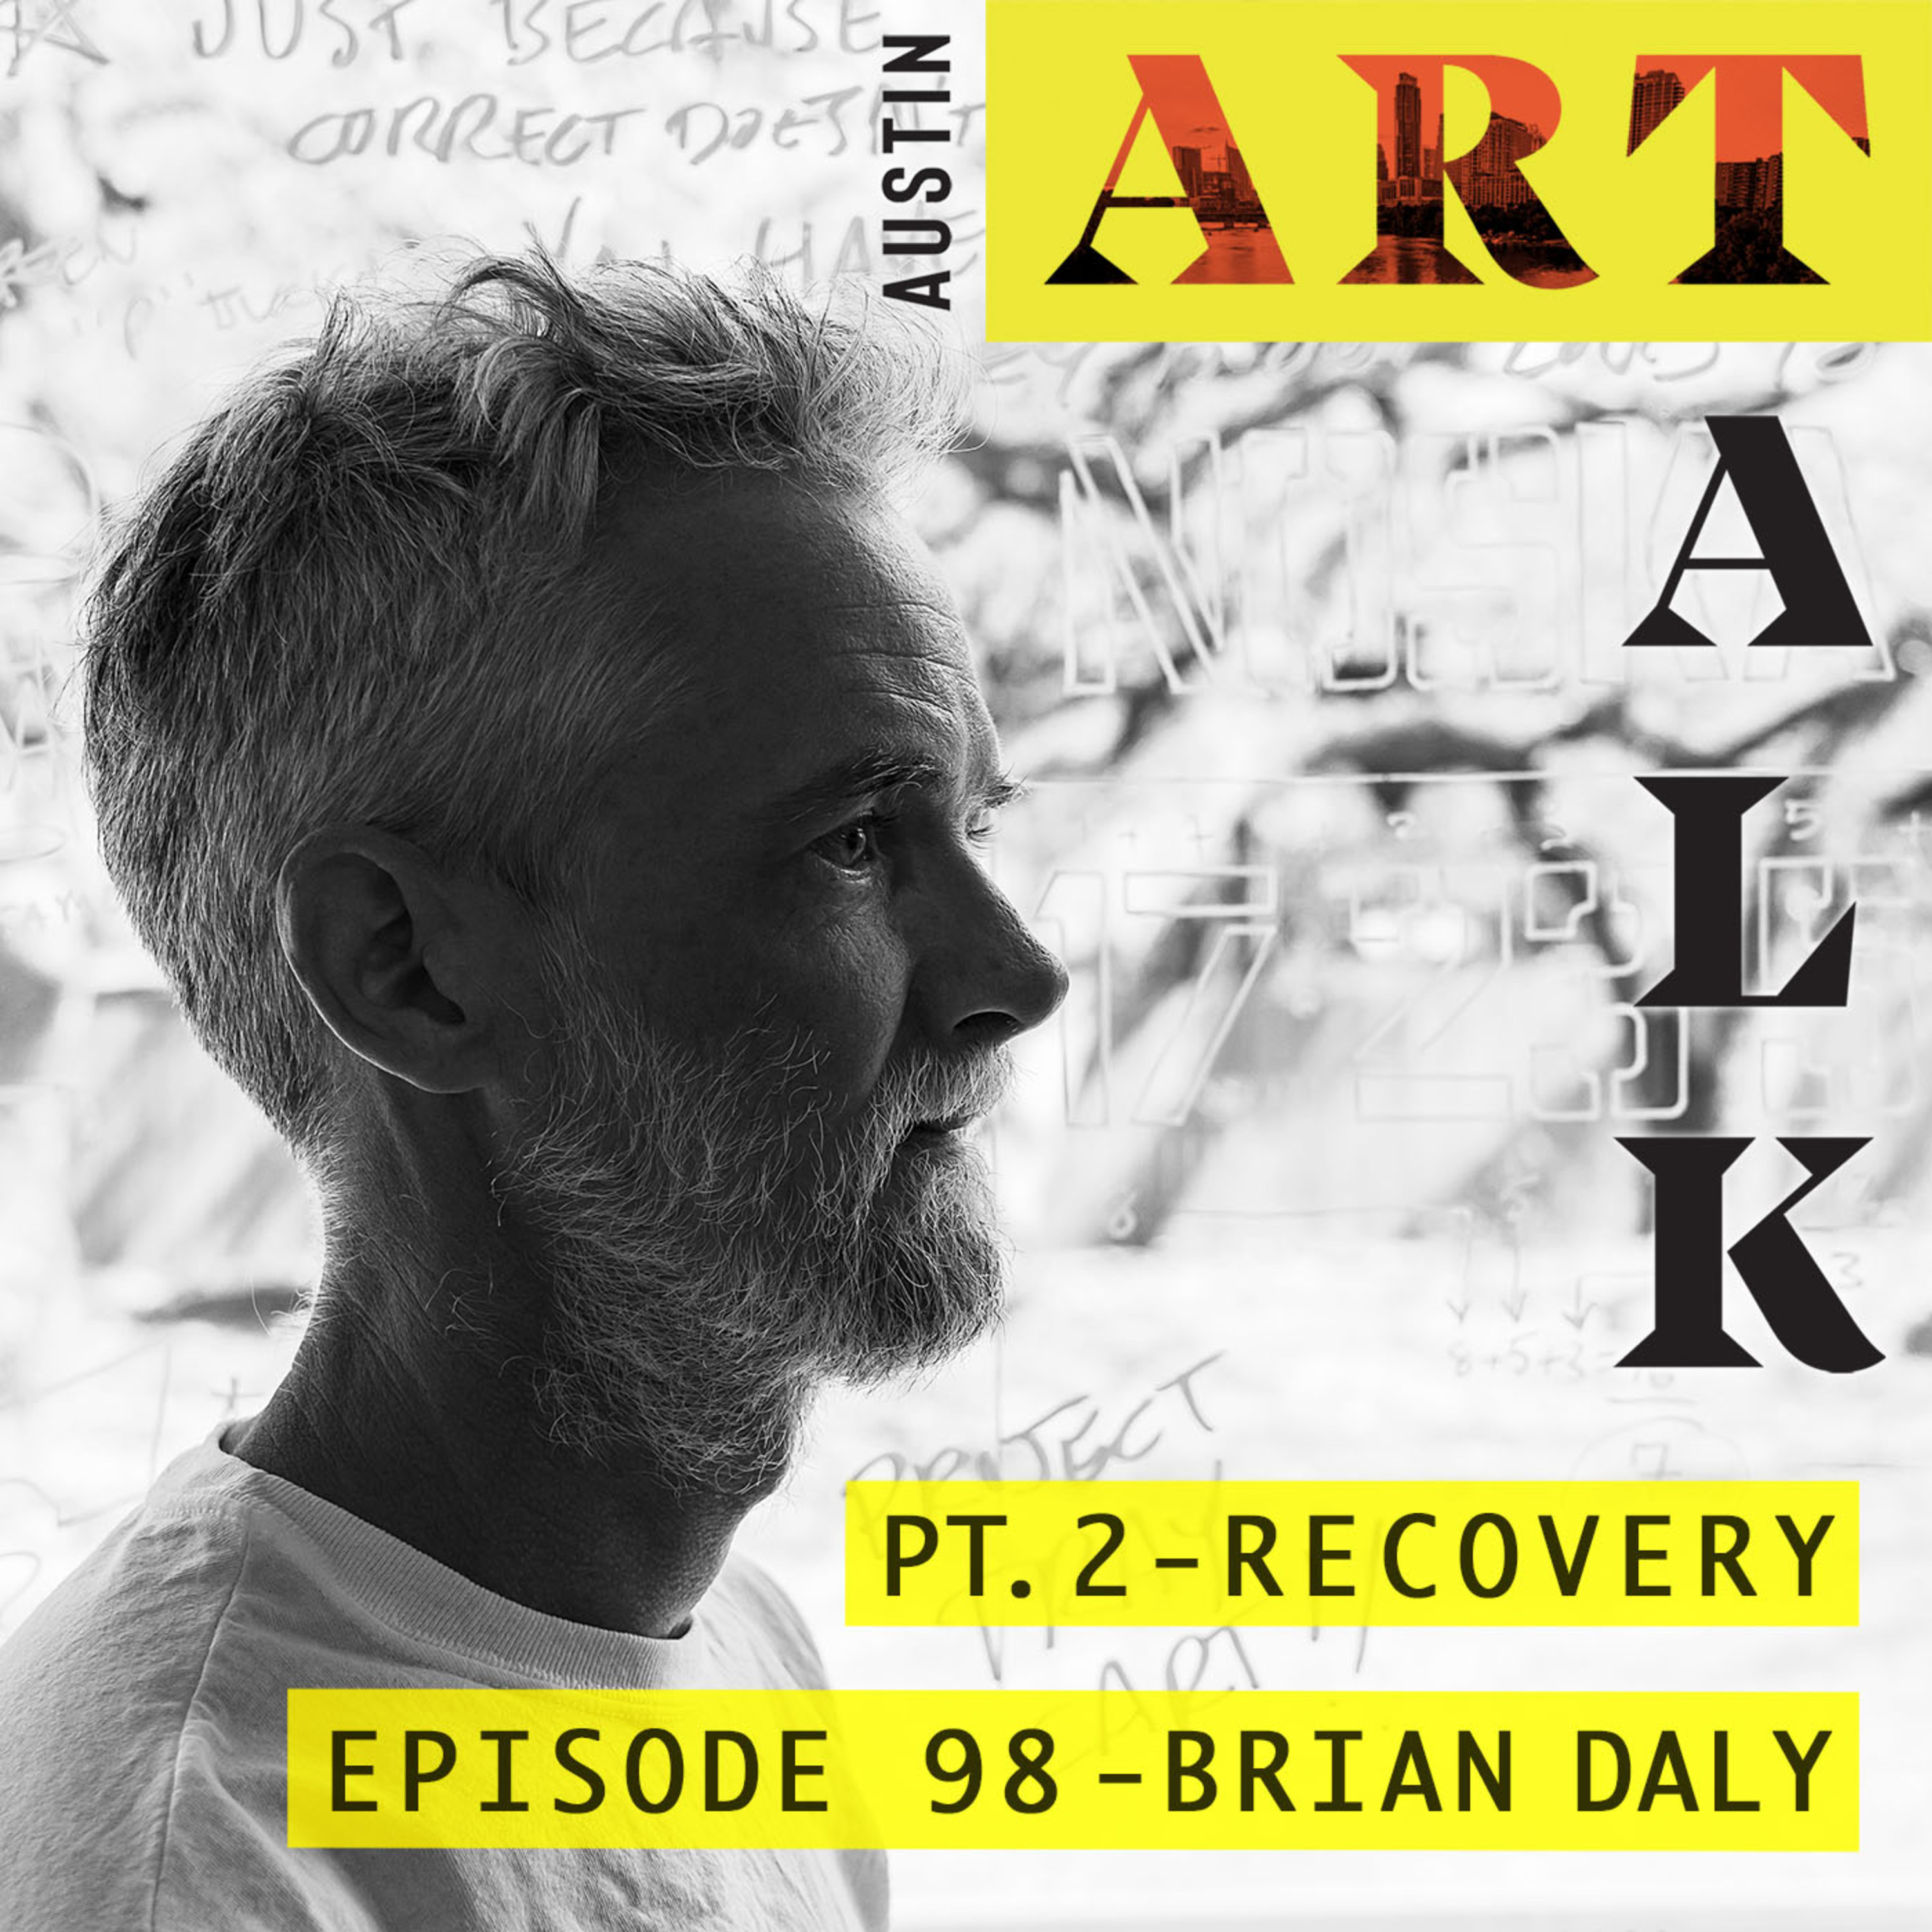 Episode 98: Brian Daly - Part 2 - Recovery